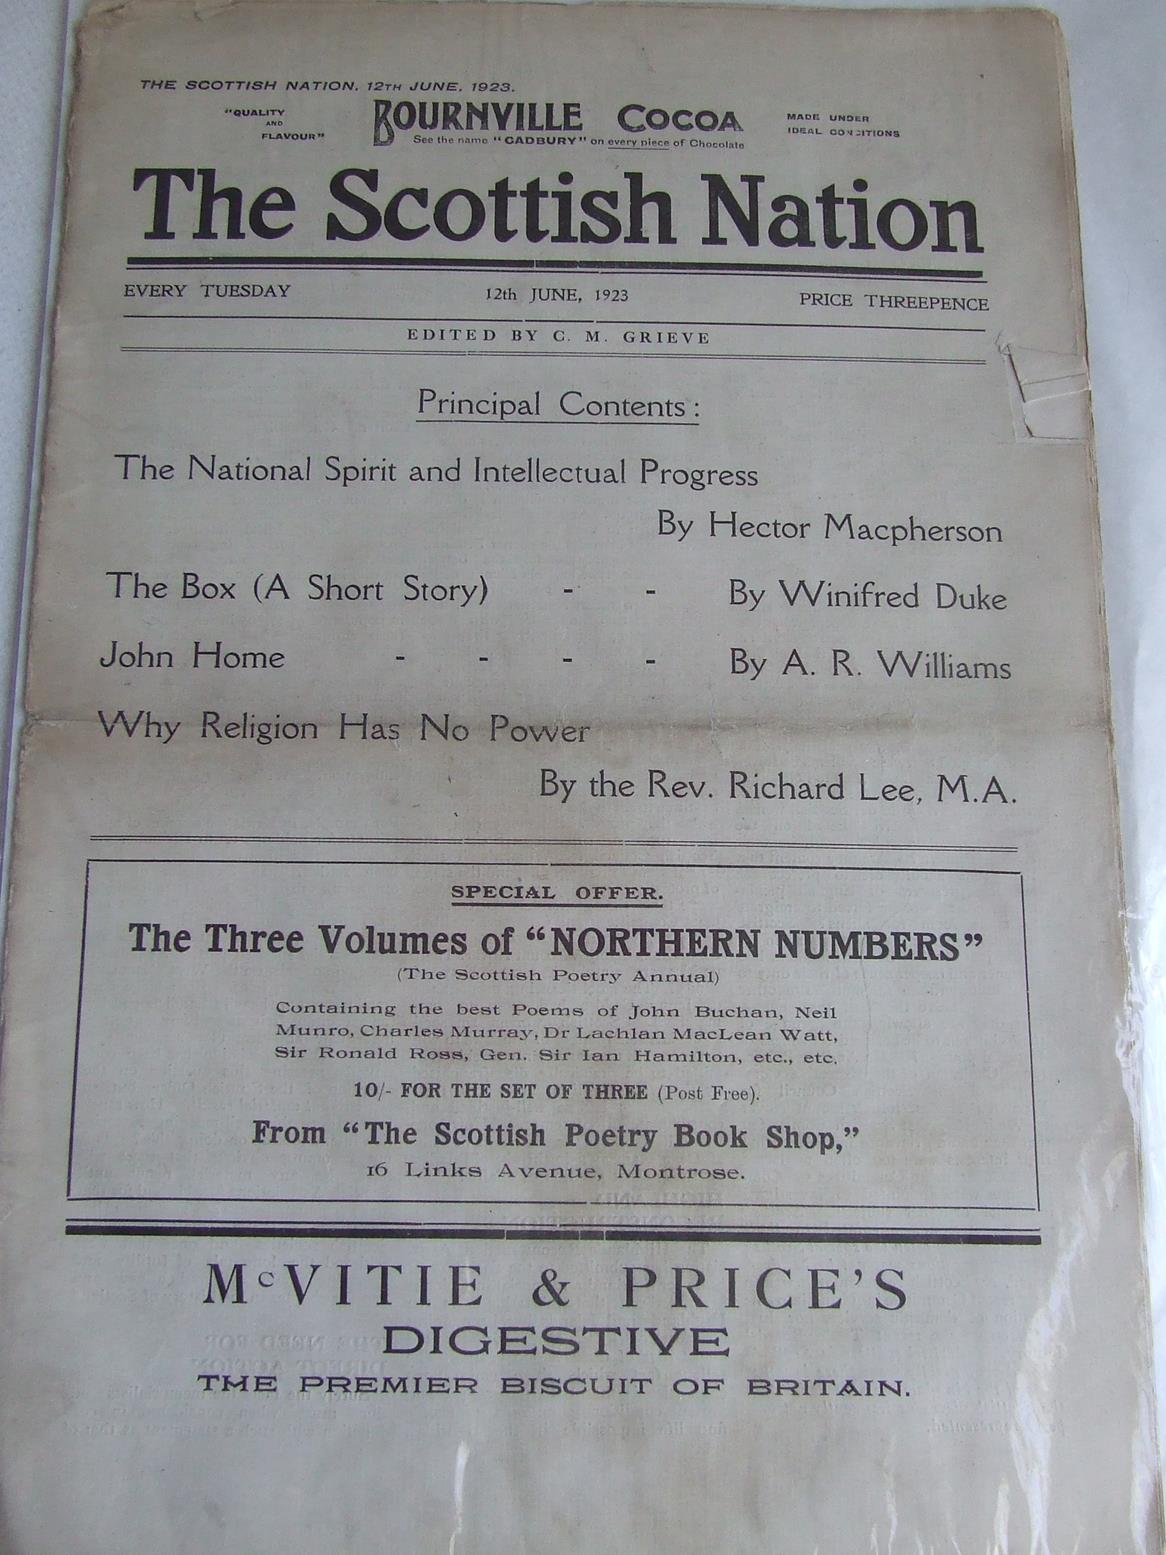 The Scottish Nation. 12th June, 1923 [issue 6]